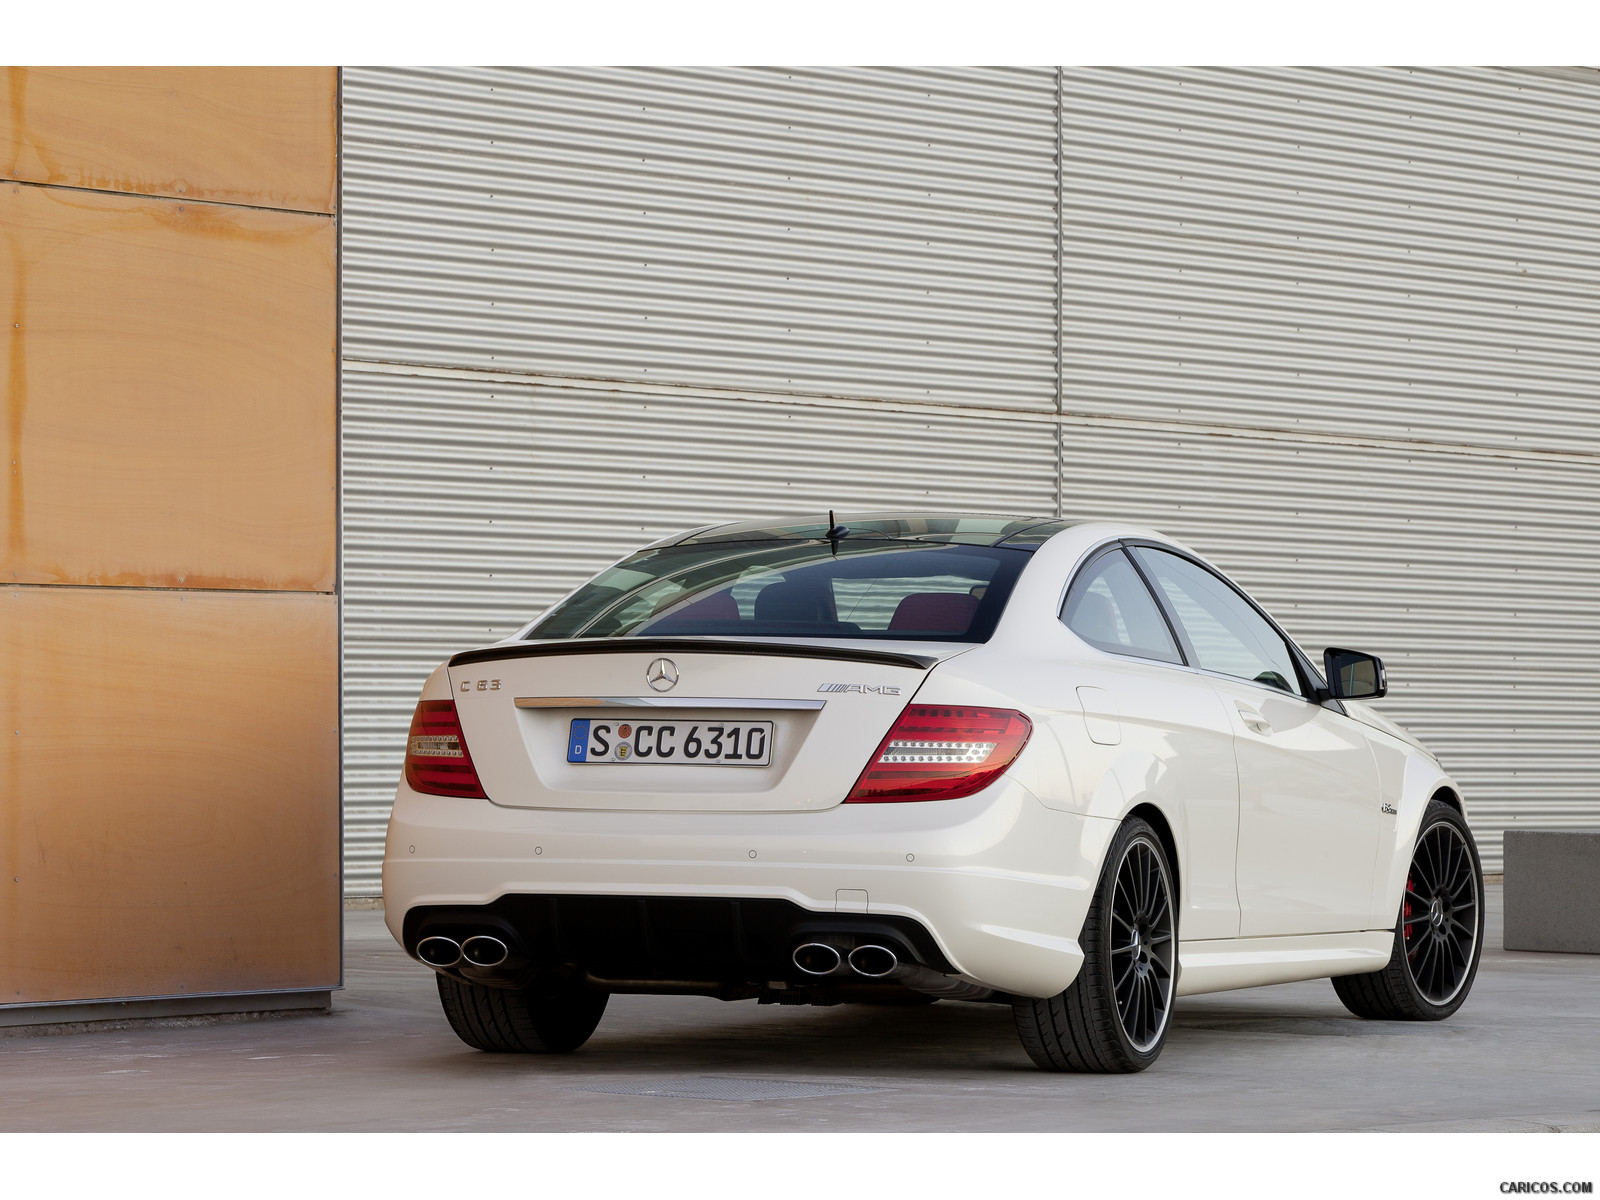 Mercedes-Benz C63 AMG Coupe (2012)  - Rear, #39 of 64